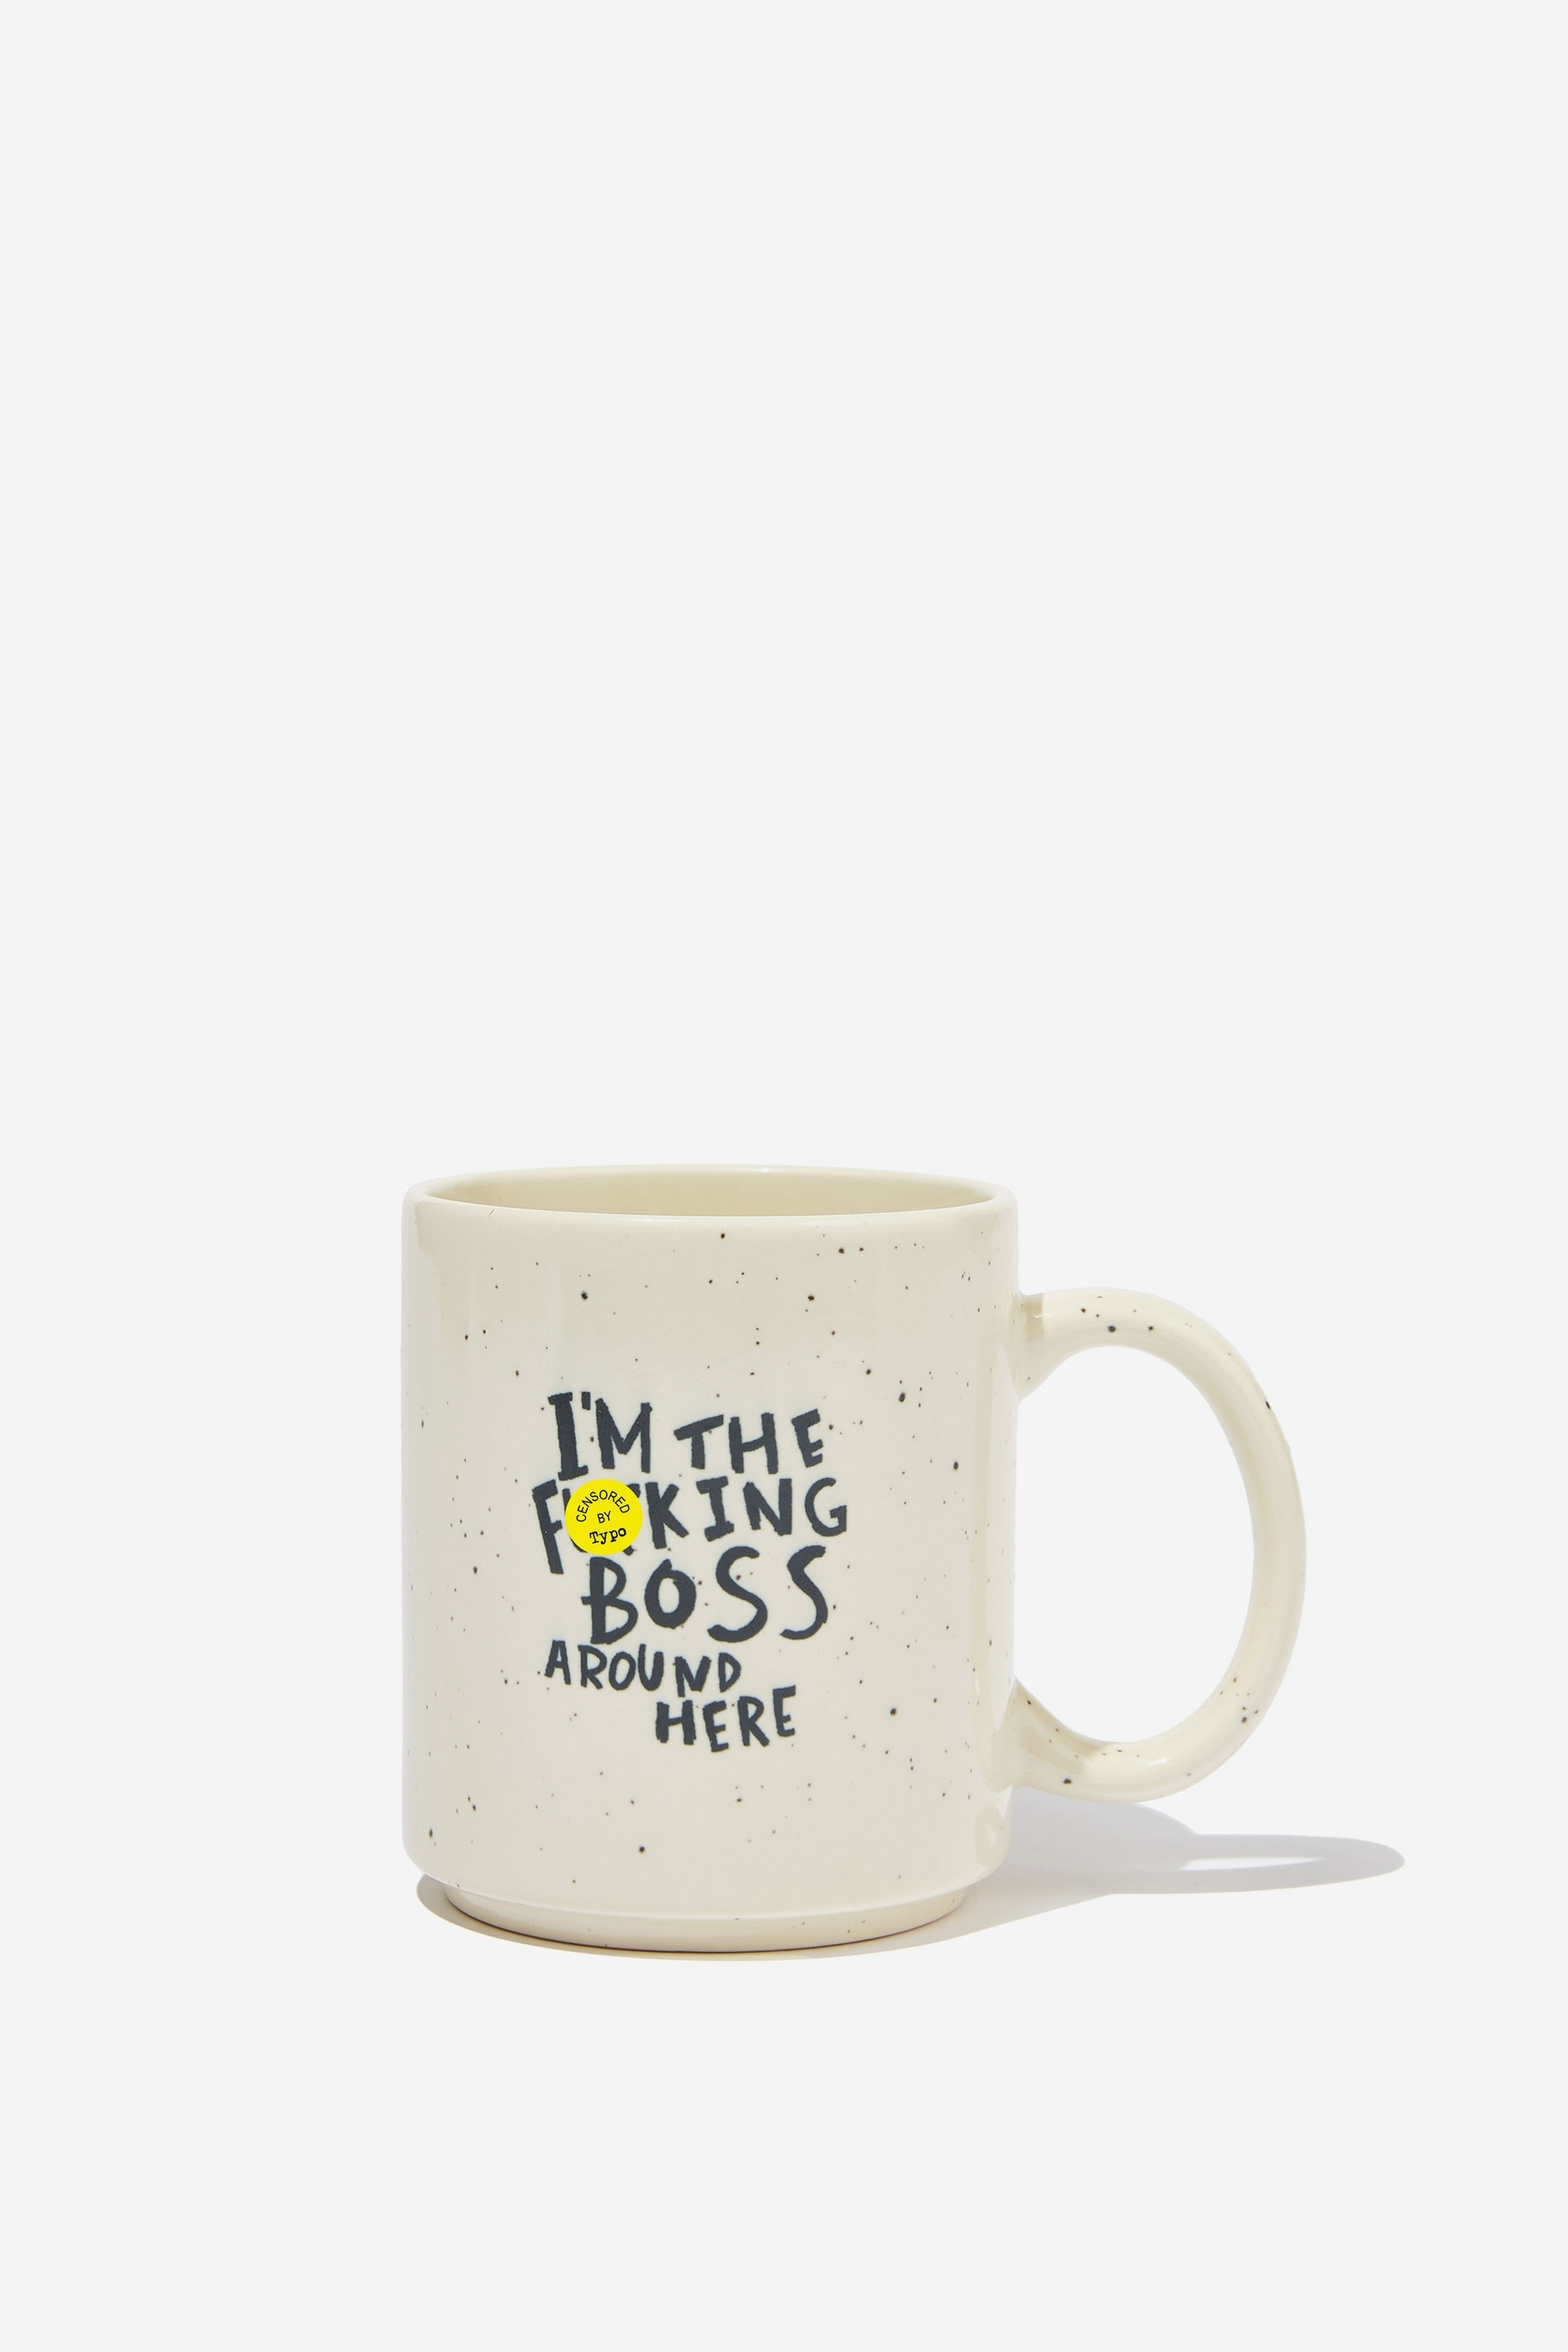 Typo - Limited Edition Mothers Day Mug - Im the boss speckle